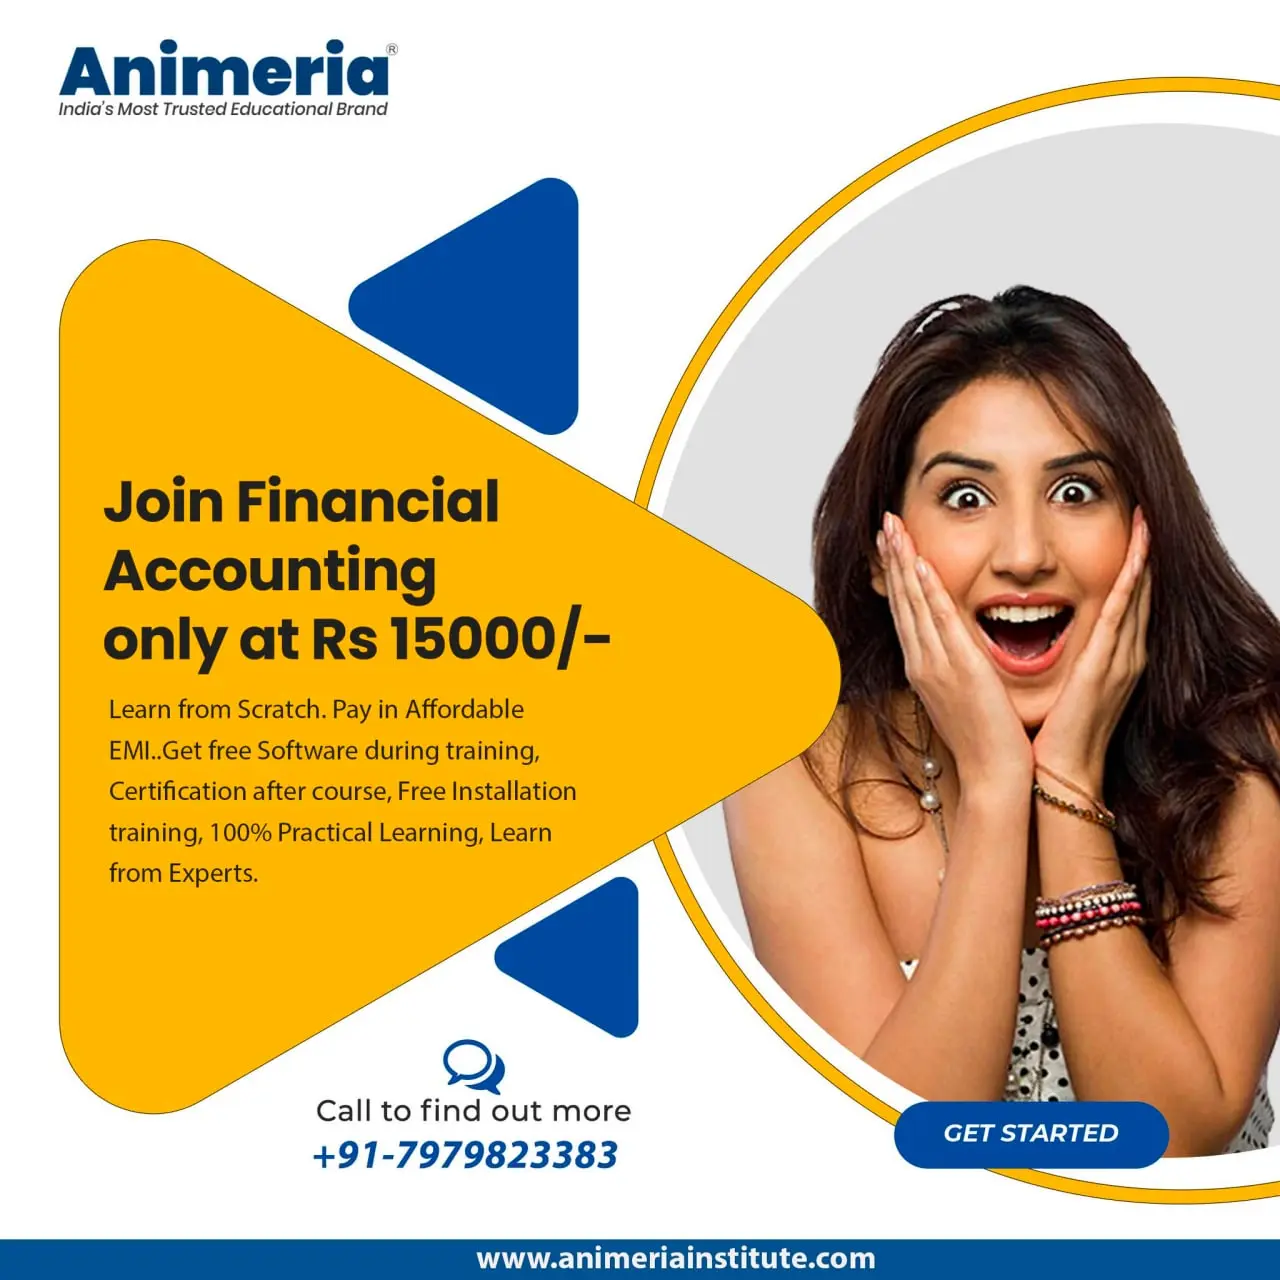 animeria-join-financial-accounting